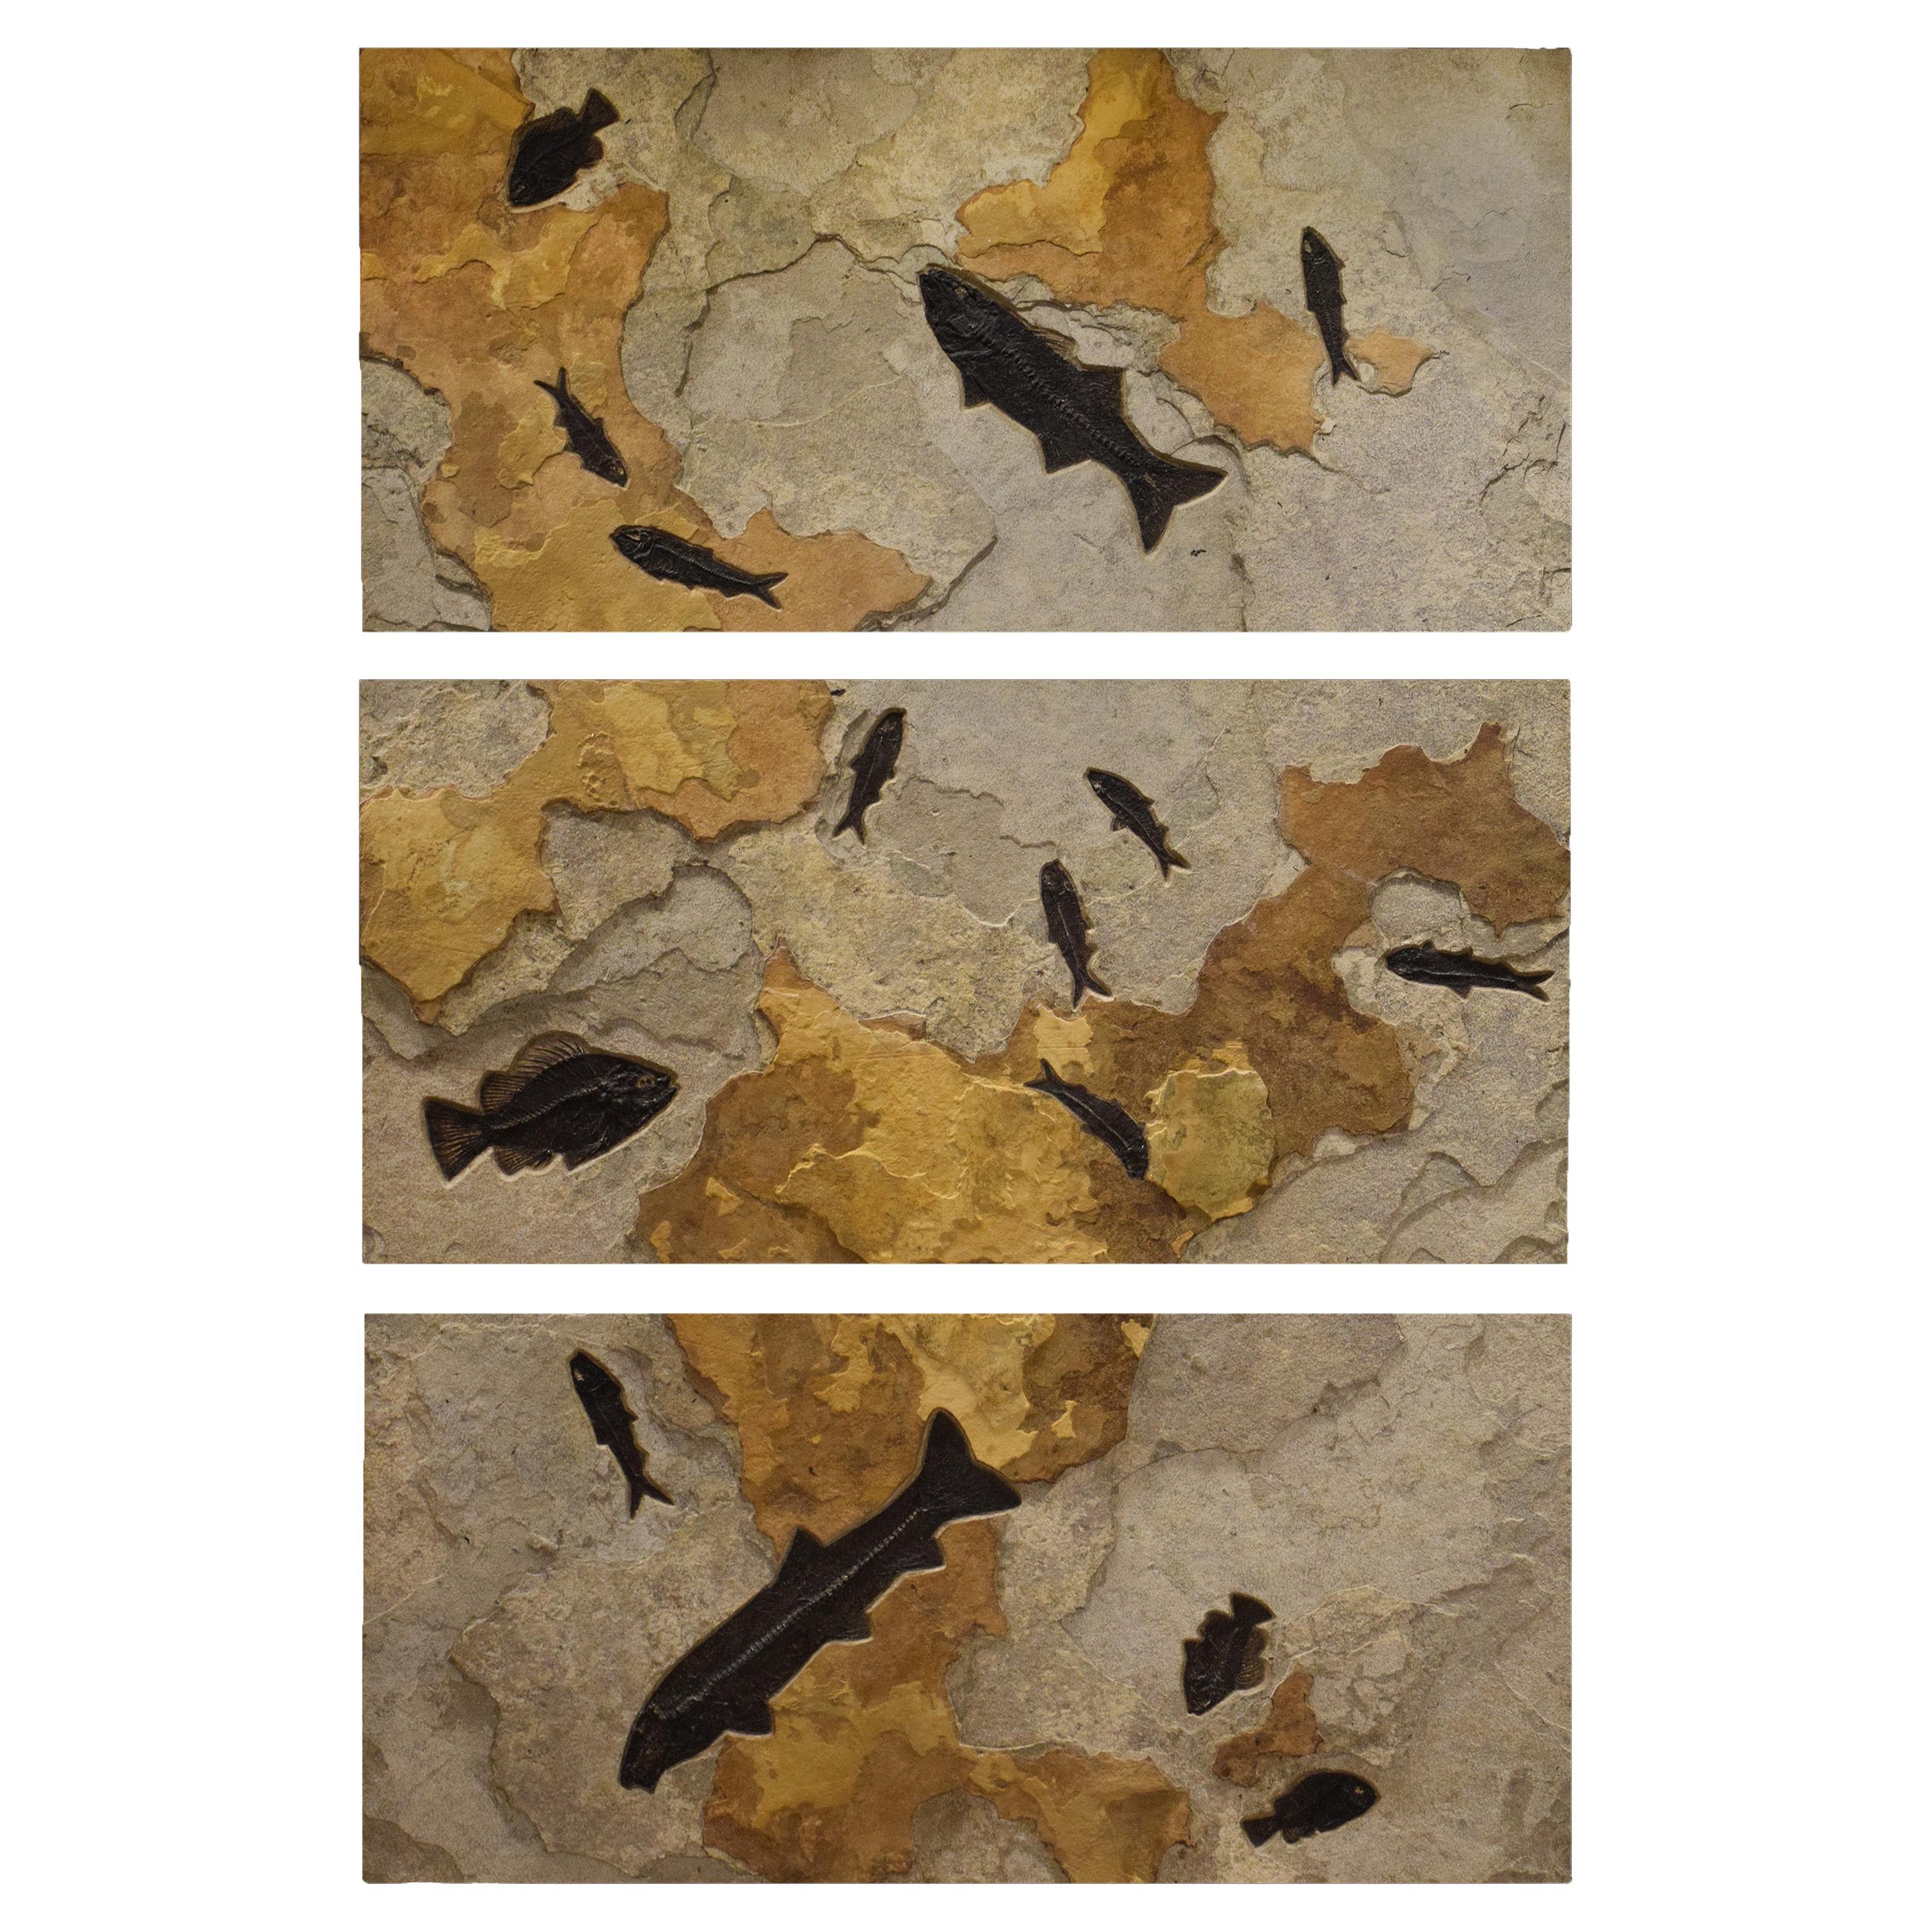 50 Million Year Old Eocene Era Fossil Fish Triptych in Stone, from Wyoming